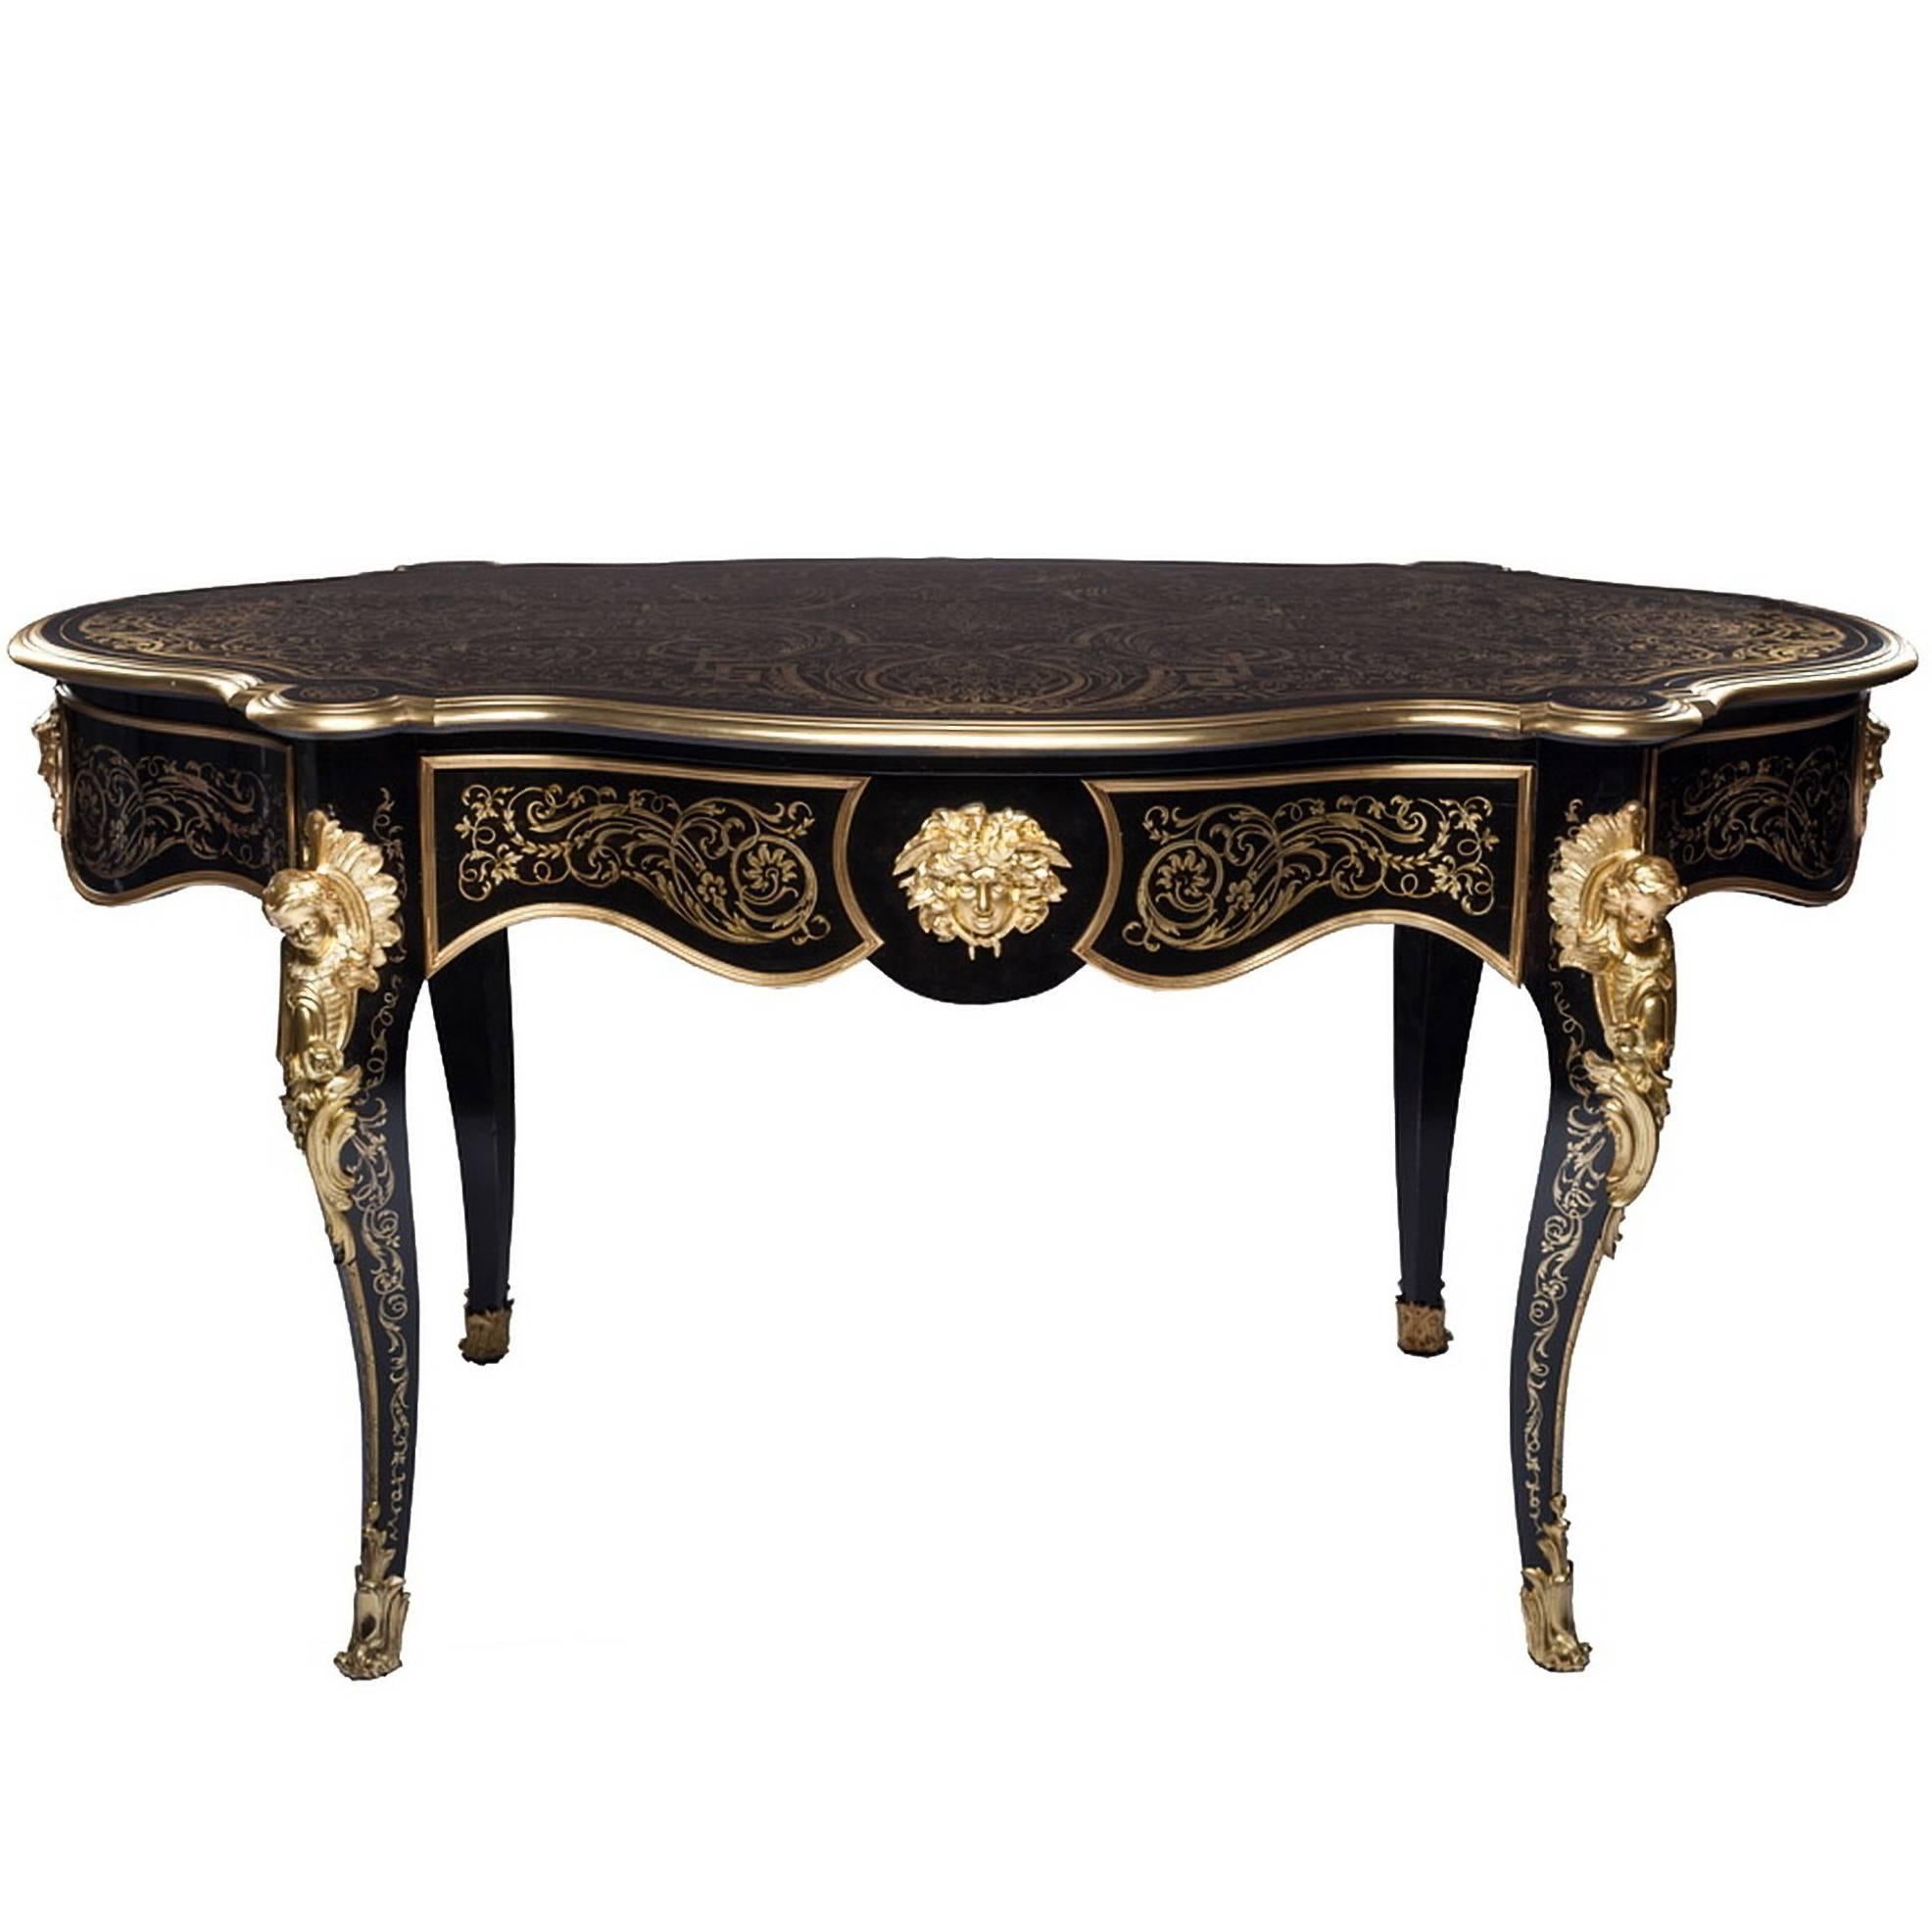 Beautiful Violin Shaped Table with Refined Boulle Marquetry on Black Veneer For Sale